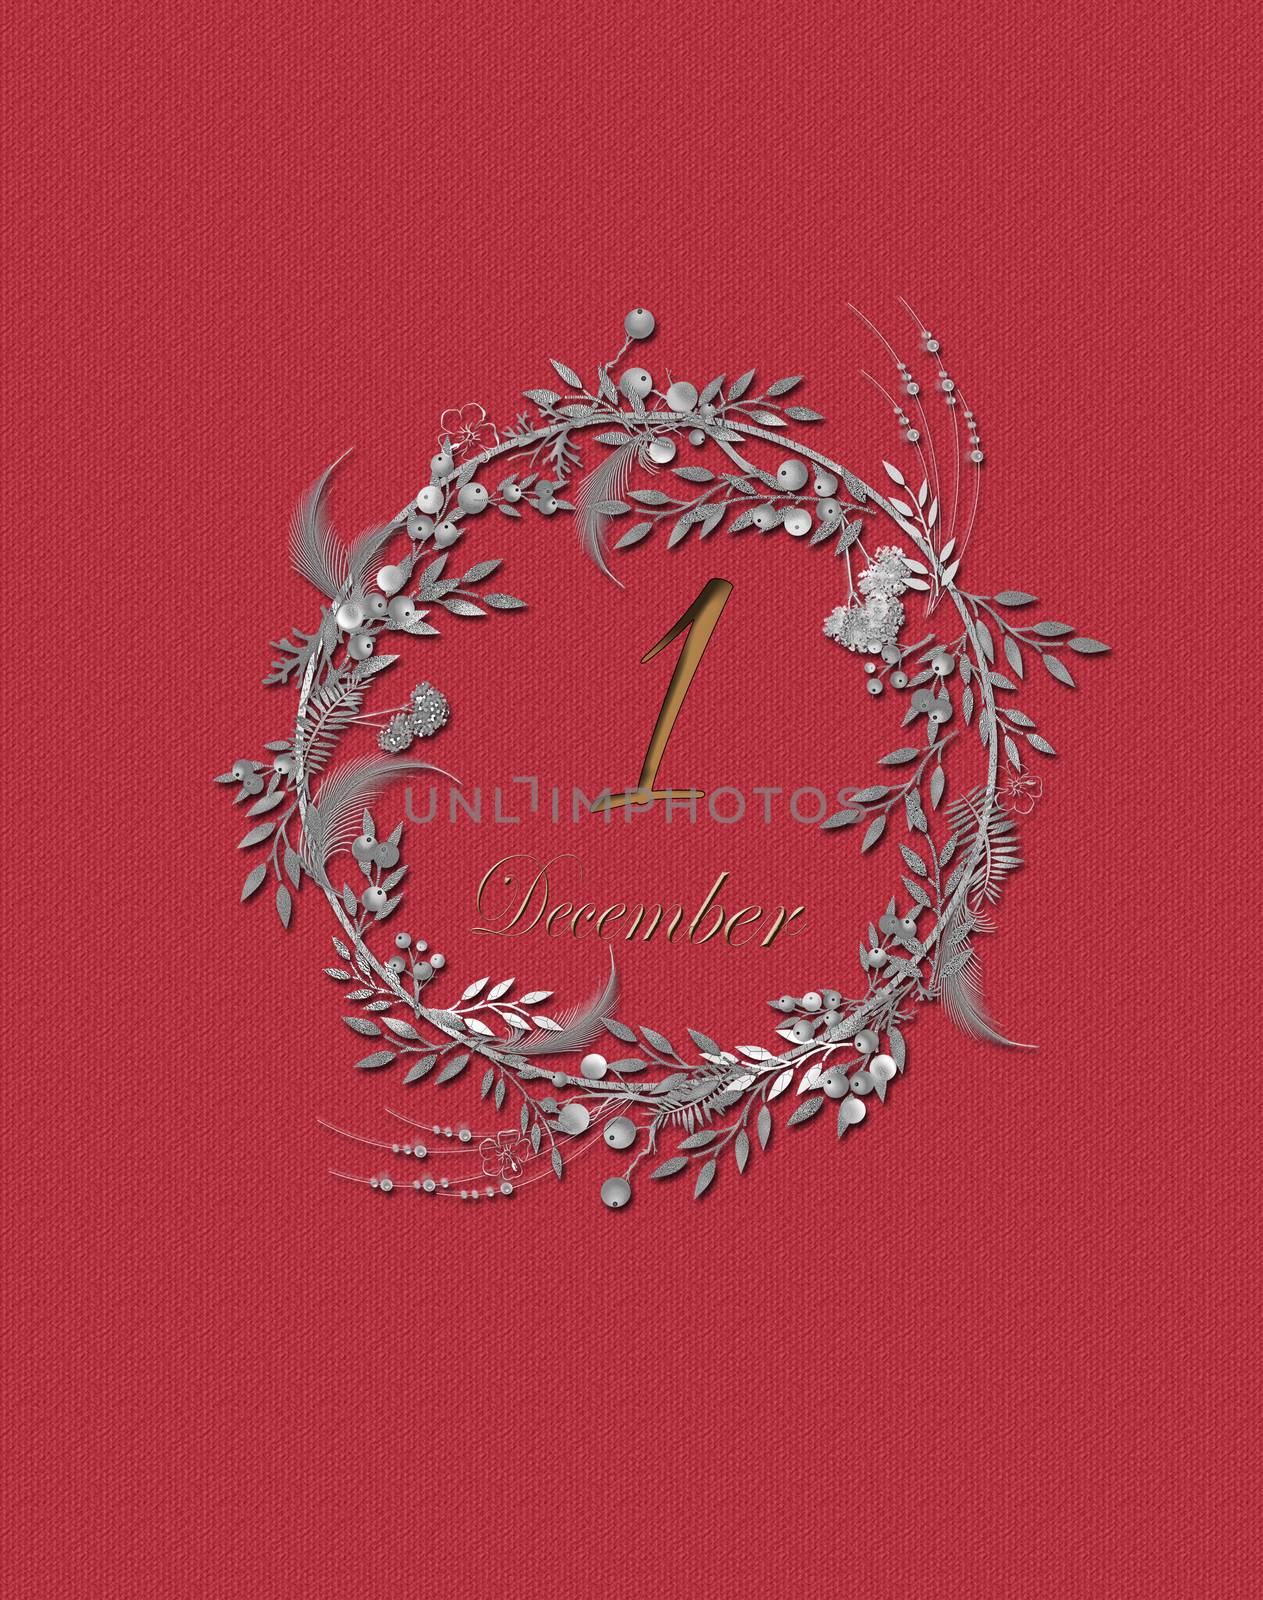 Minimalist festive Christmas Wreath design in silver colour and text 1 December on red background. 3D illustration